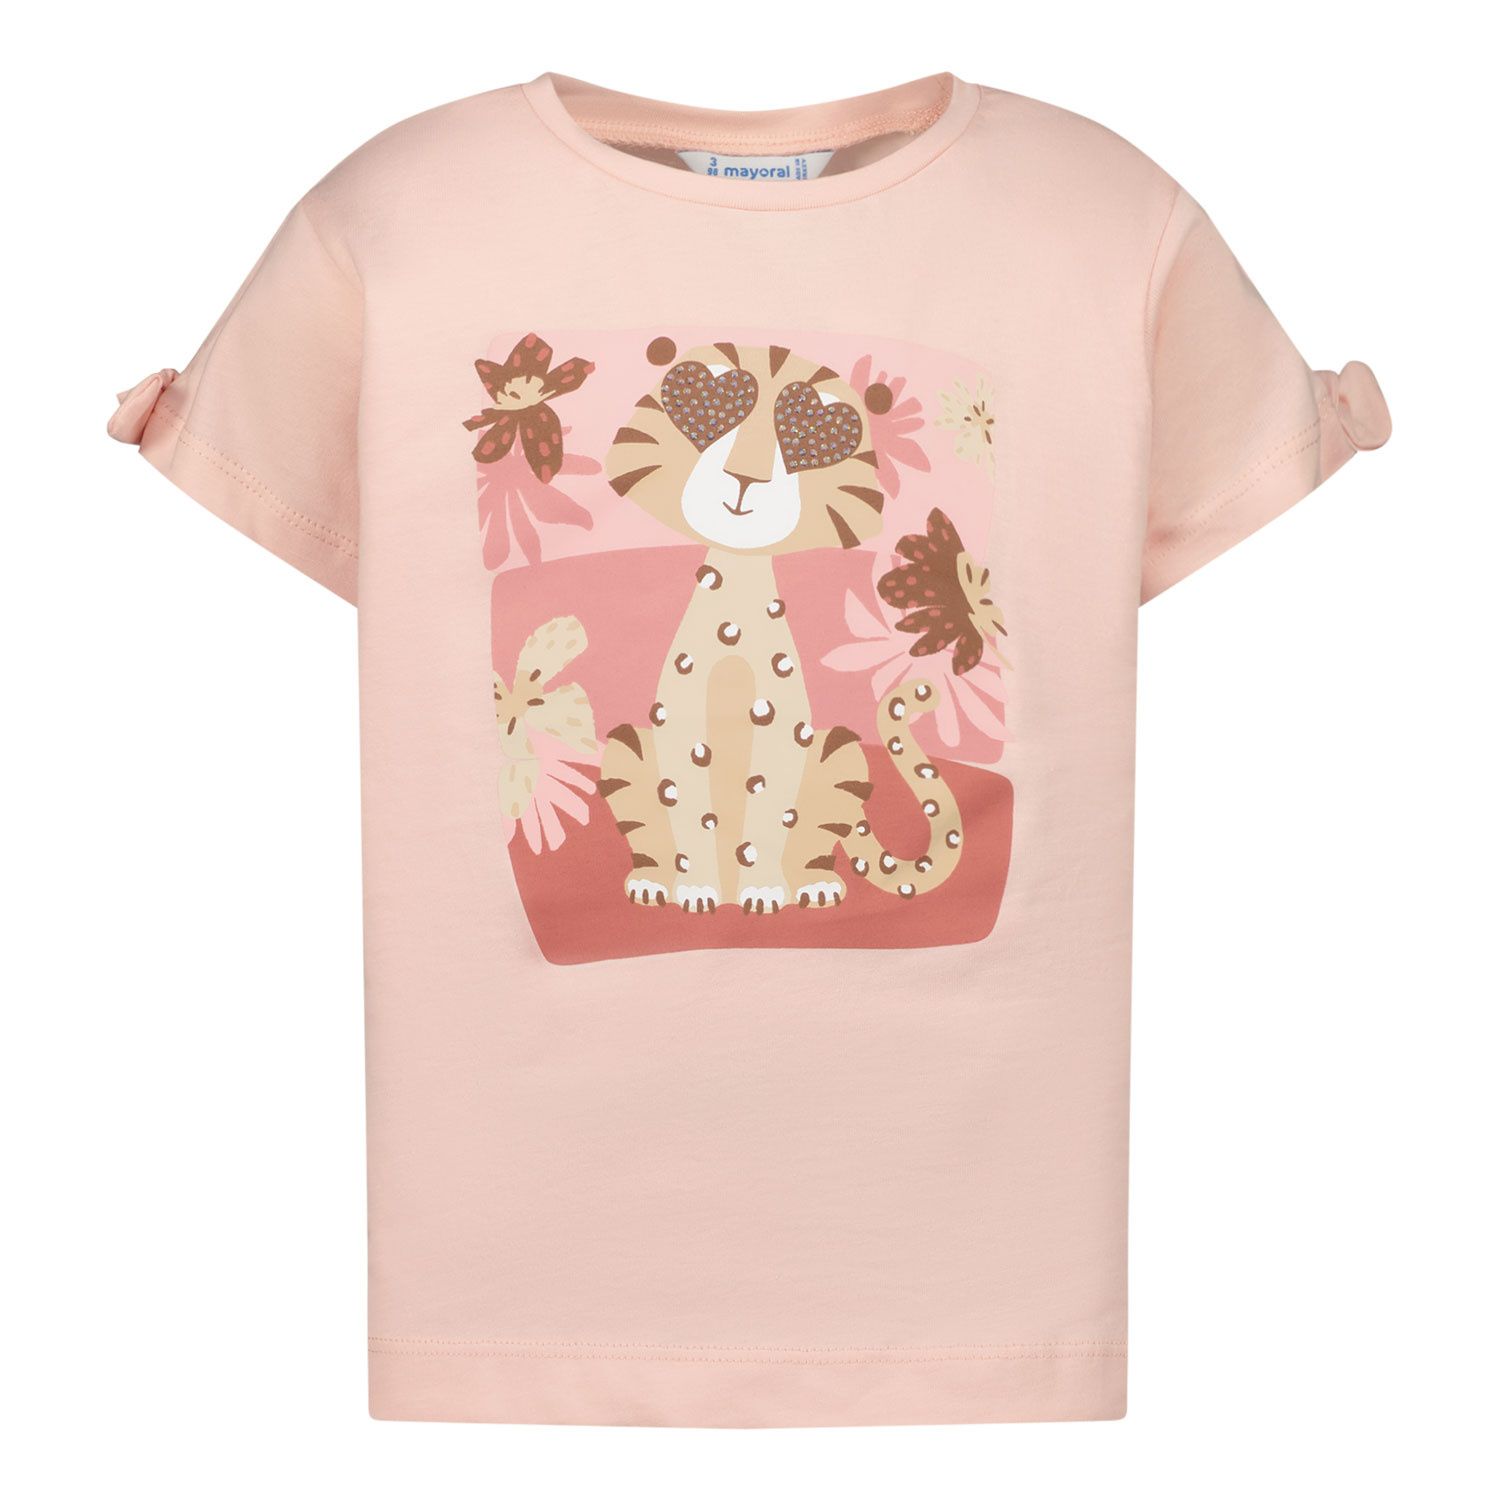 Picture of Mayoral 3035 kids t-shirt light pink